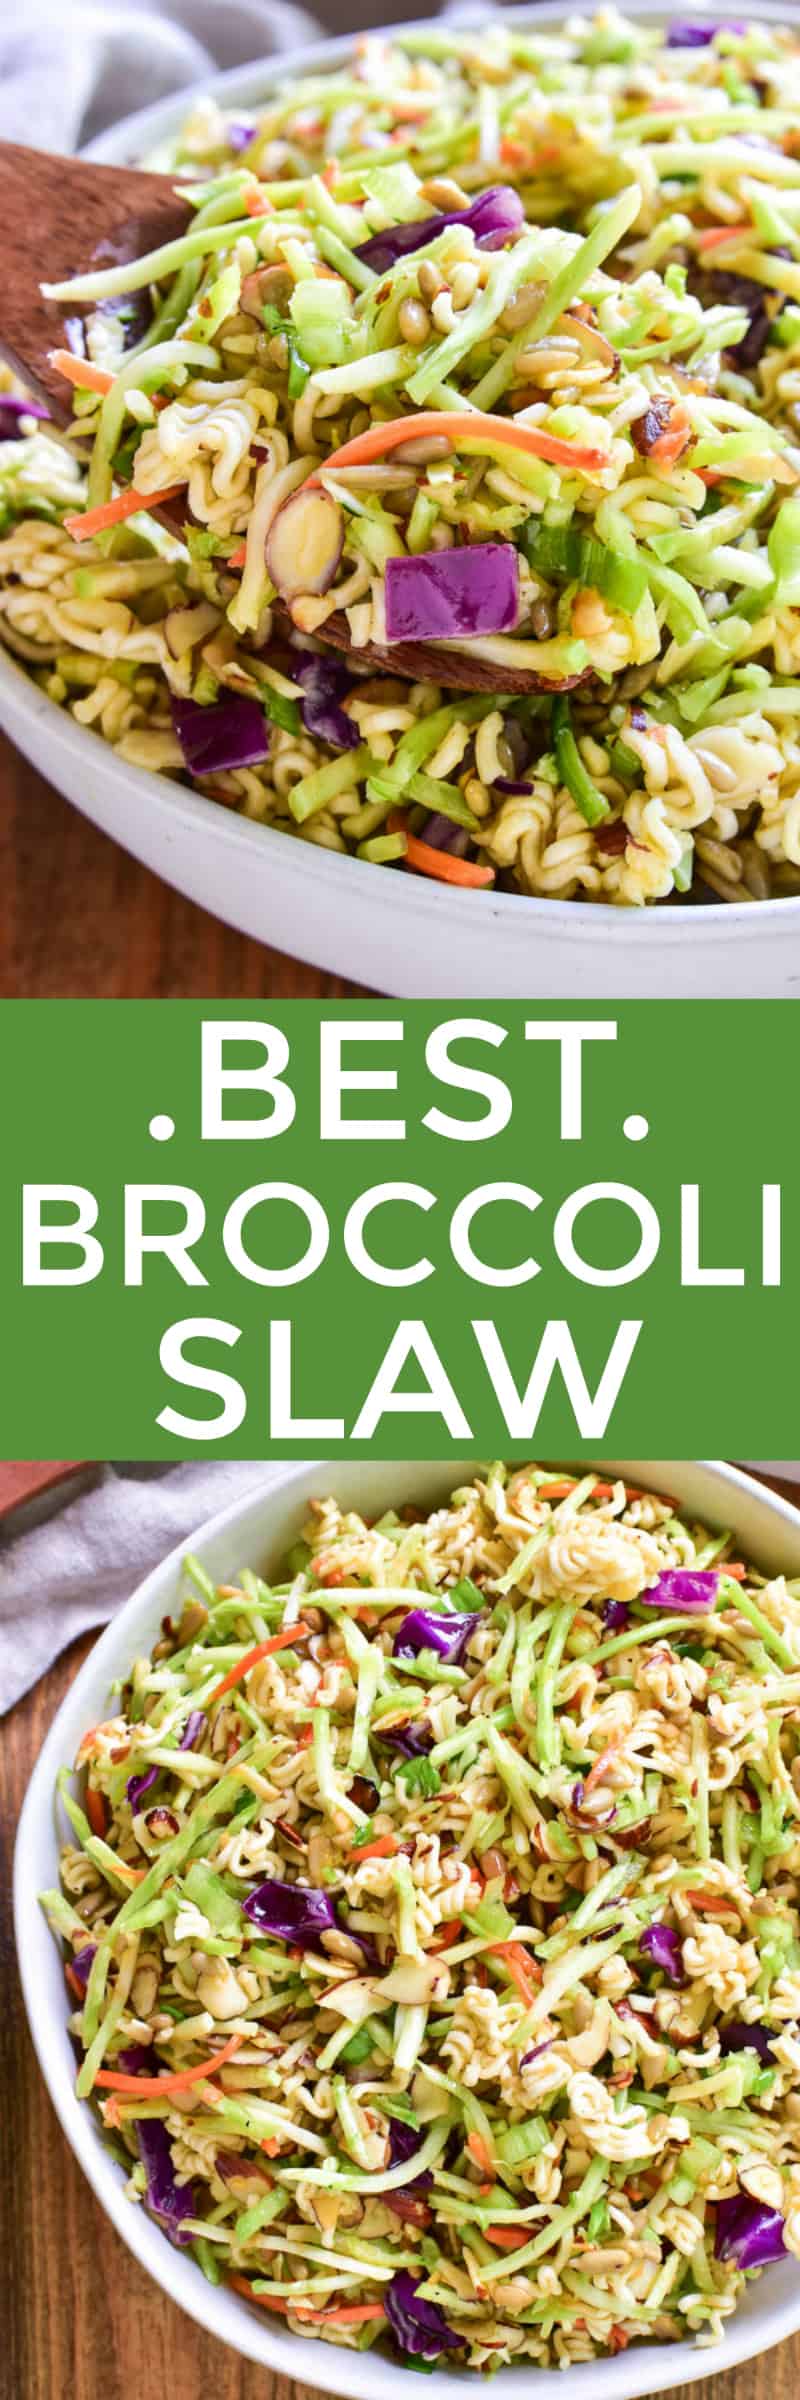 The BEST Broccoli Slaw recipe! This salad always gets rave reviews. It's loaded with broccoli, almonds, sunflower seeds, ramen noodles, and green onions and tossed in the most flavorful dressing. Perfect for end of summer picnics or year round get togethers, if you love cole slaw, you'll love this delicious broccoli slaw twist!